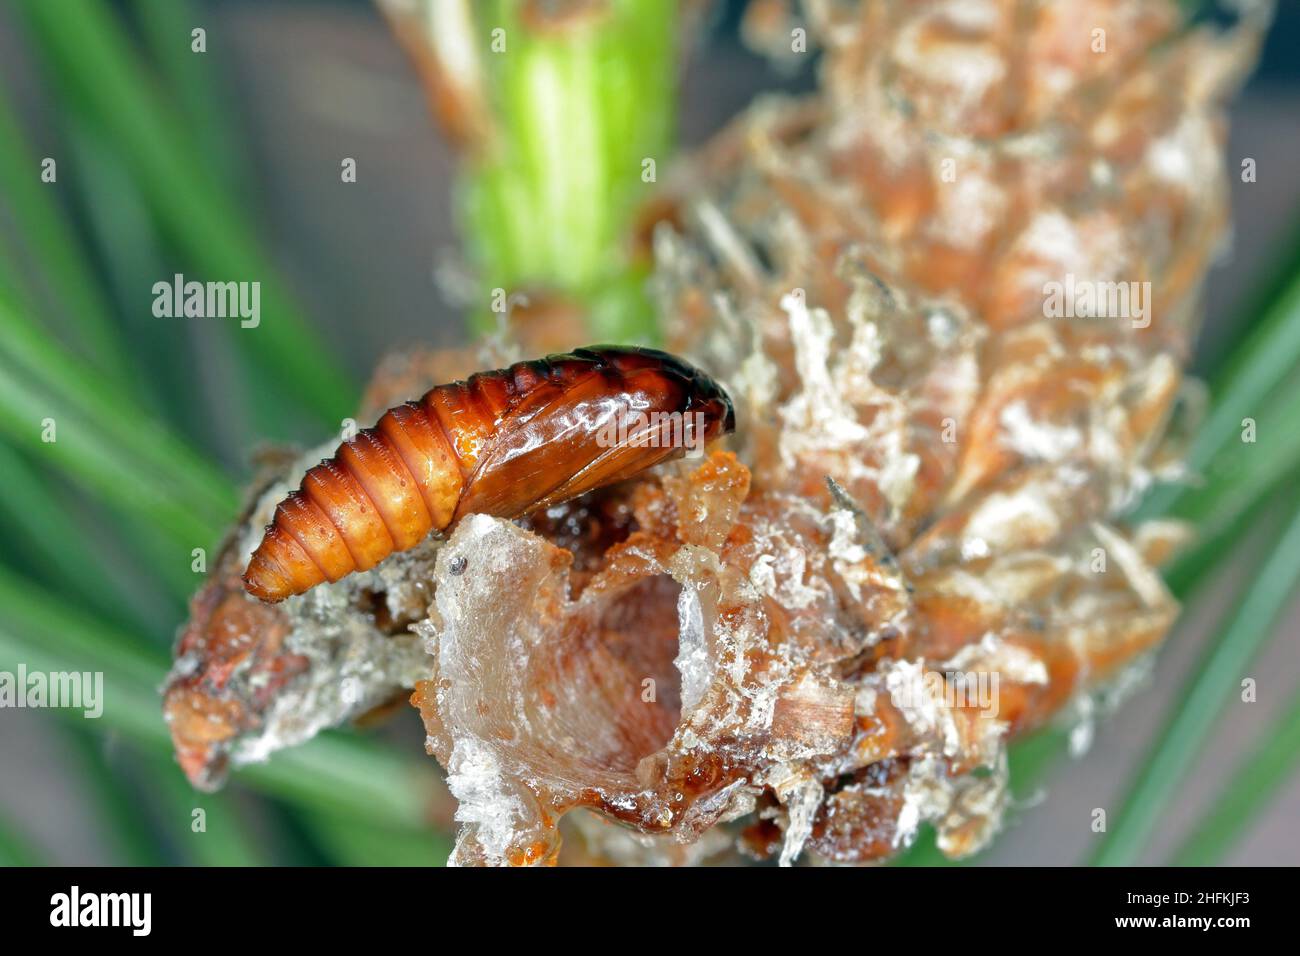 Pupa of Rhyacionia buoliana, the pine shoot moth, is a moth of the family Tortricidae. The larvae feed on young pine shoots. It is a dangerous pest. Stock Photo